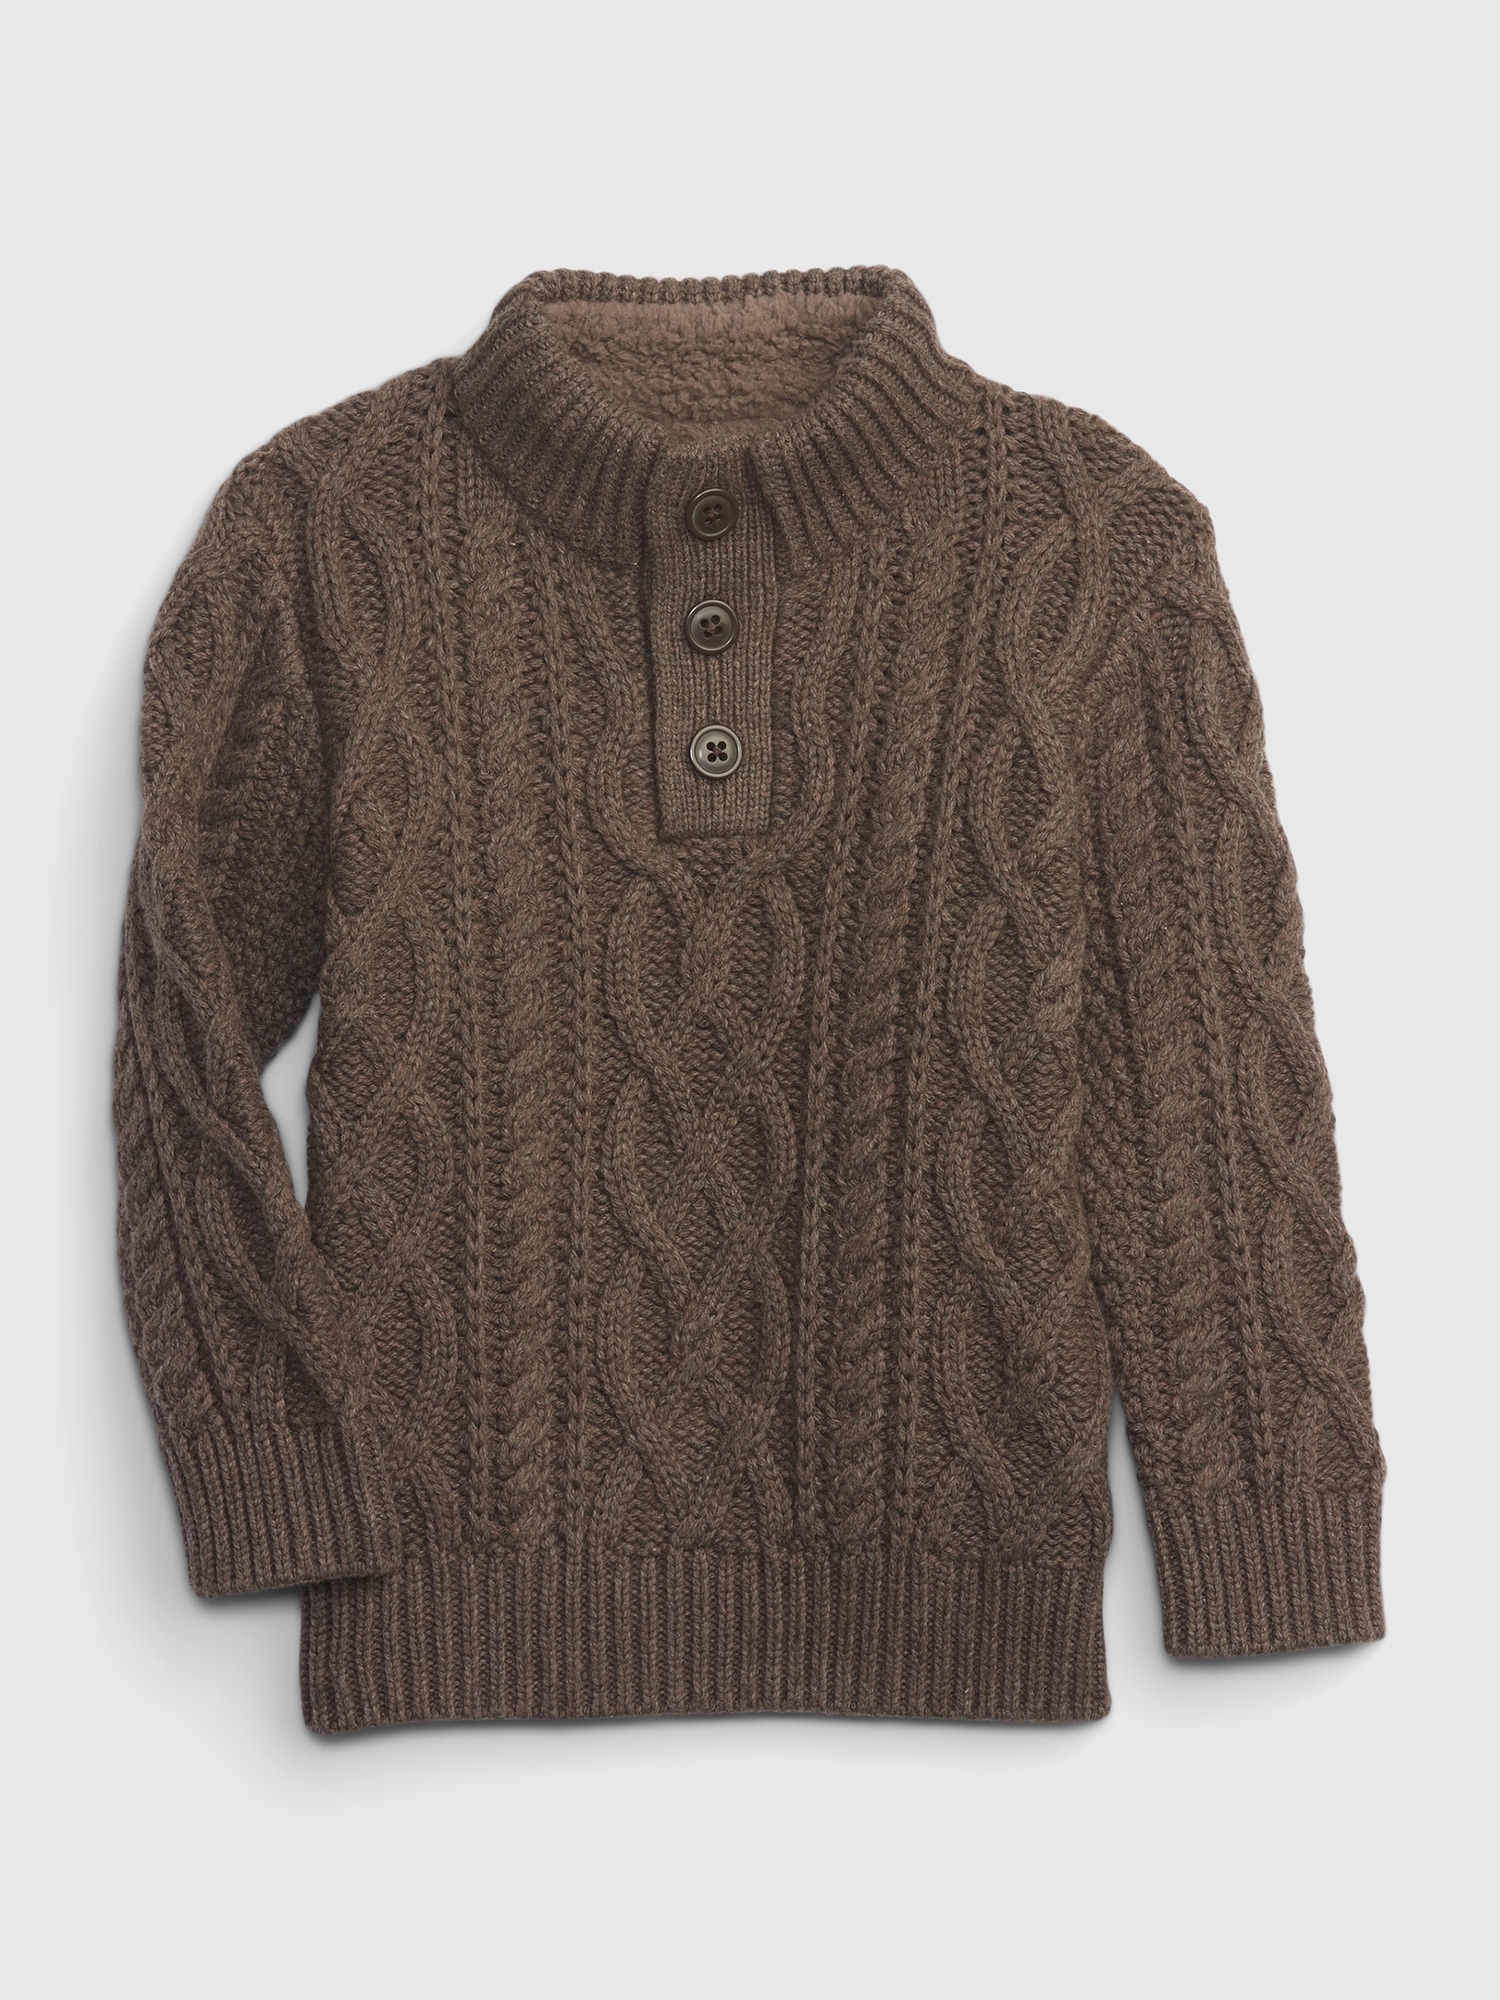 Gap Toddler Cable-Knit Sweater